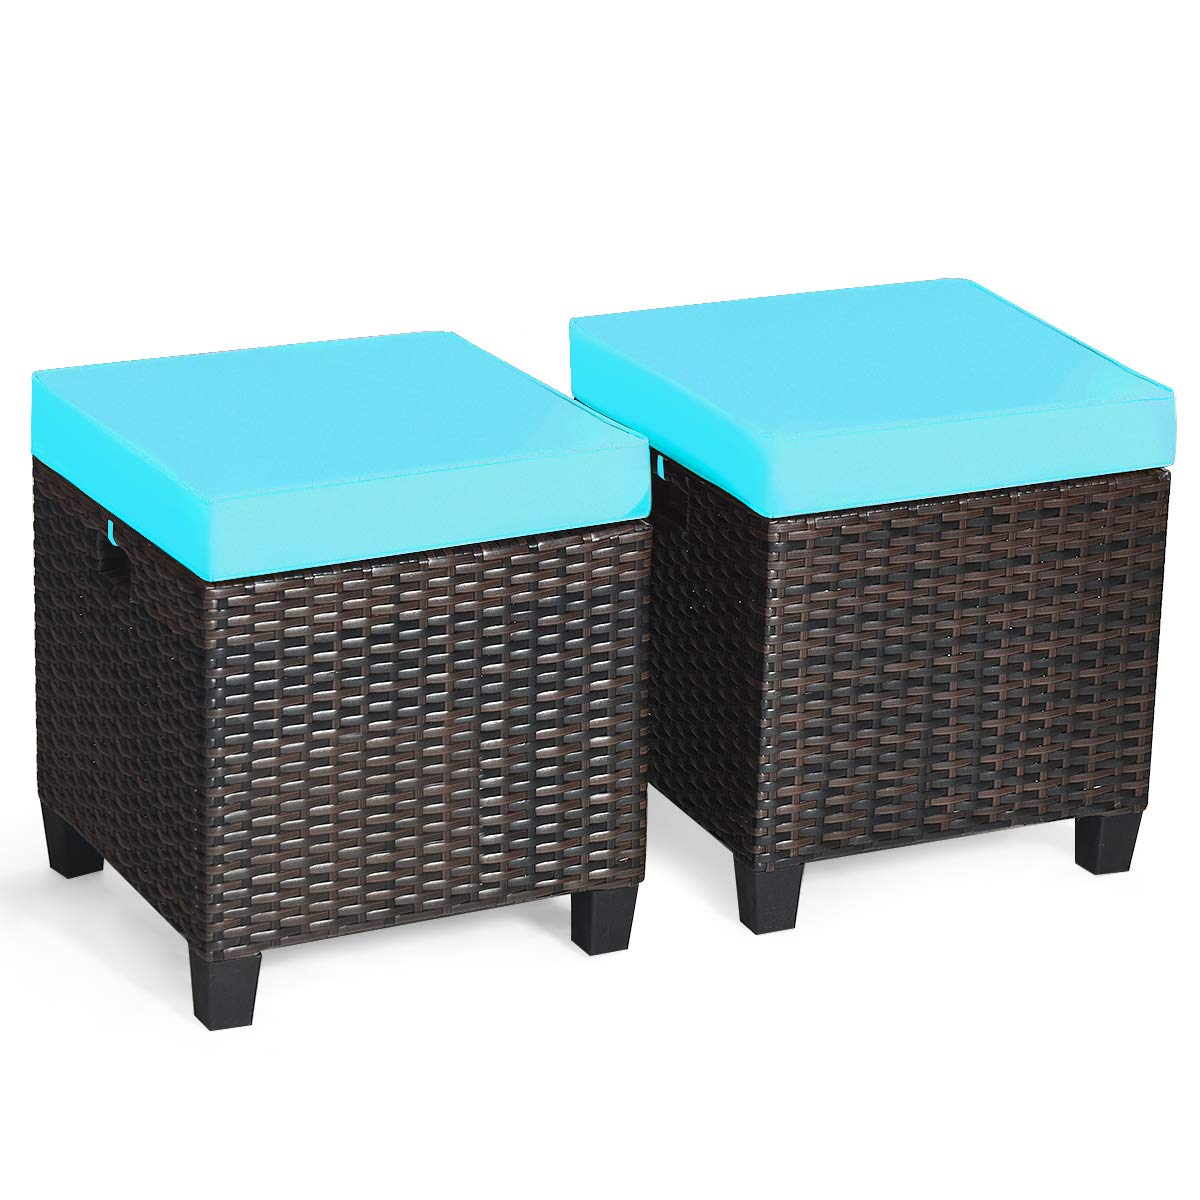 Tangkula 2 Pieces Outdoor Patio Ottoman, All Weather Rattan Wicker Ottoman Seat, Patio Rattan Furniture, Outdoor Footstool Footr